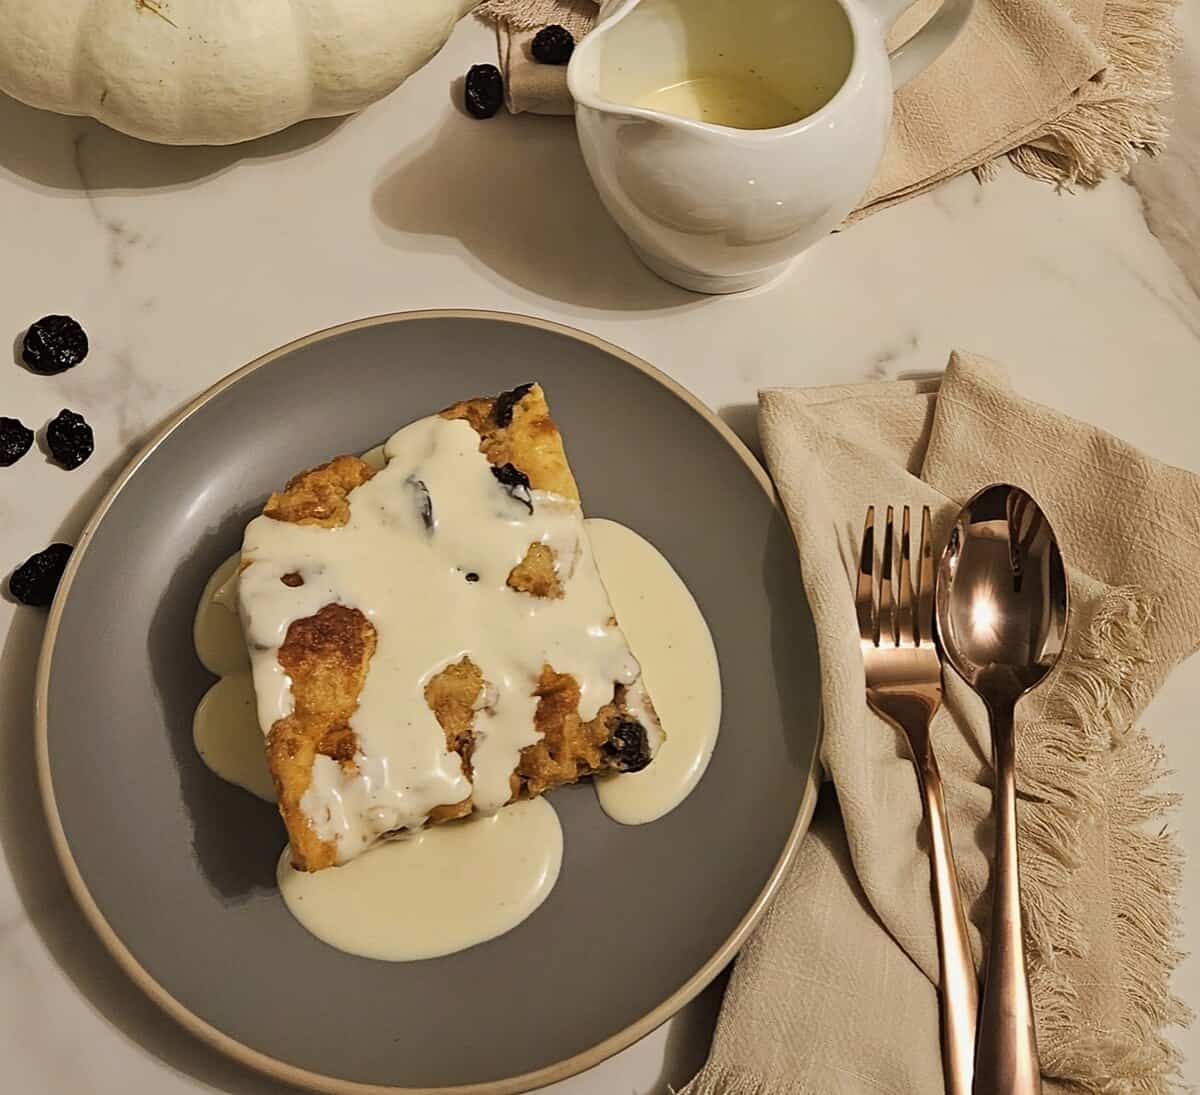 plated bread pudding with crème anglaise sauce, linen napkins, fork and spoon